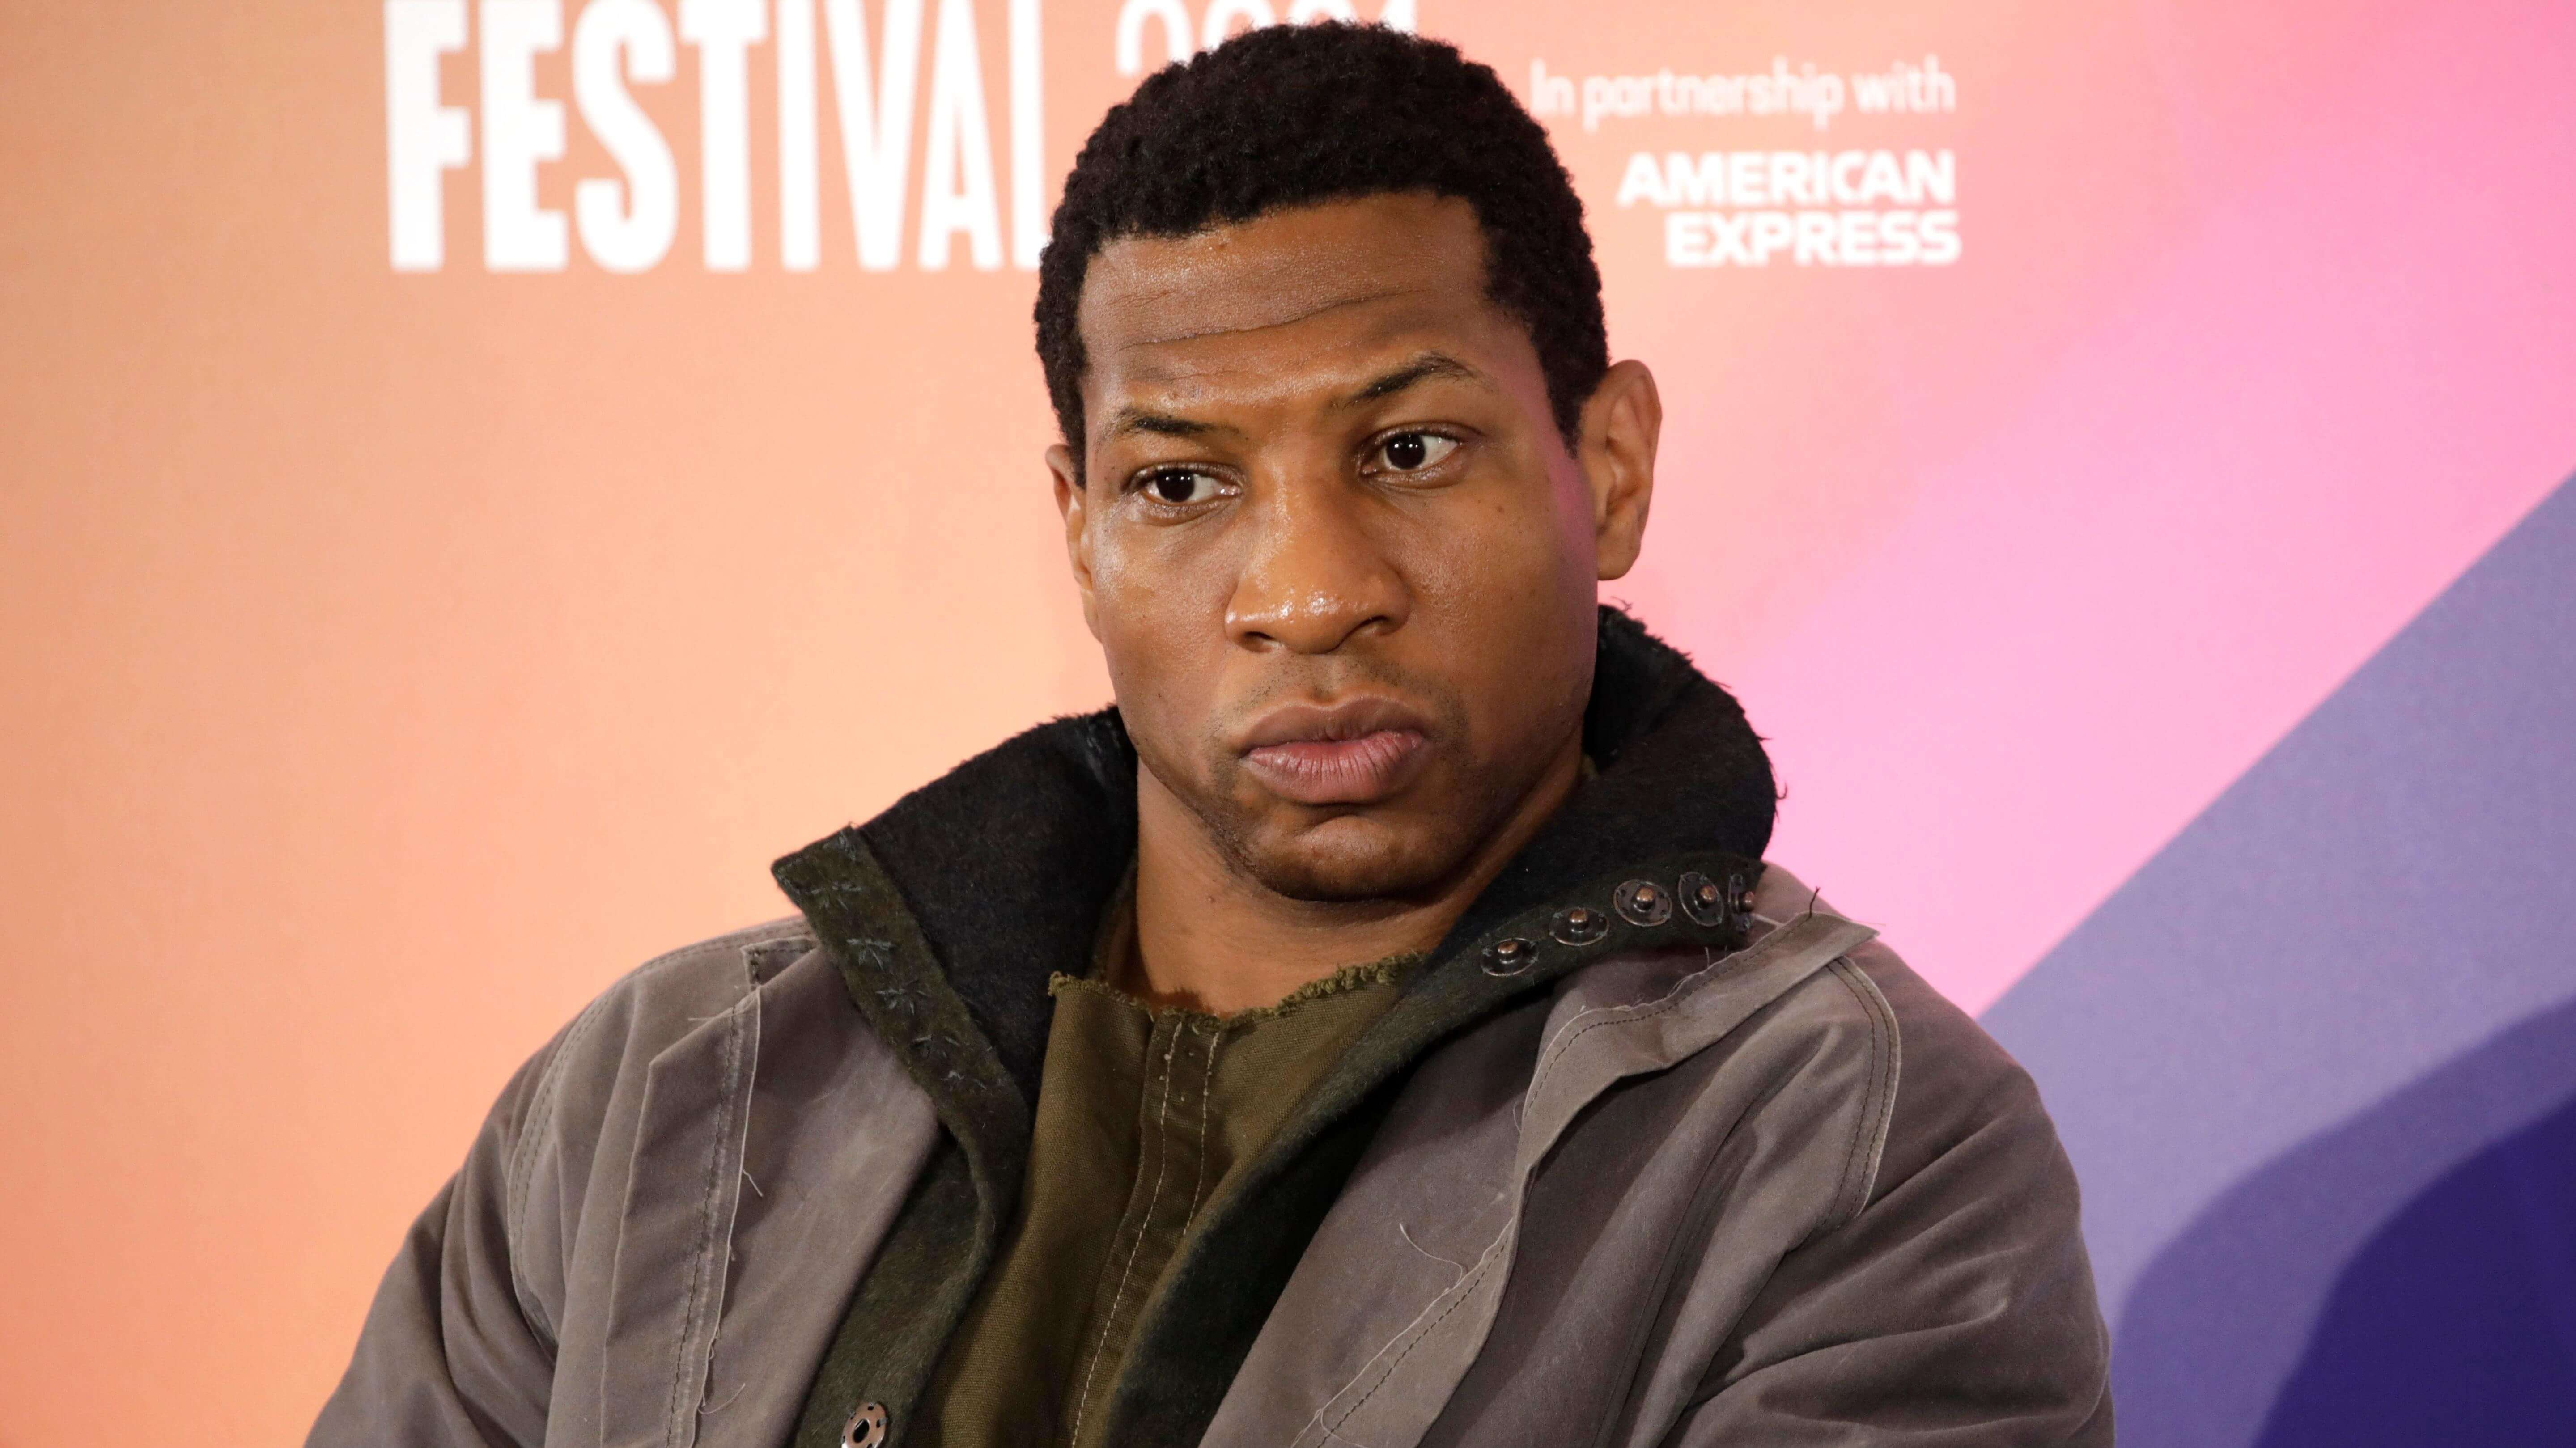 Jonathan Majors trial reveals alarming texts: “I’m a monster, a horrible man, not capable of love”